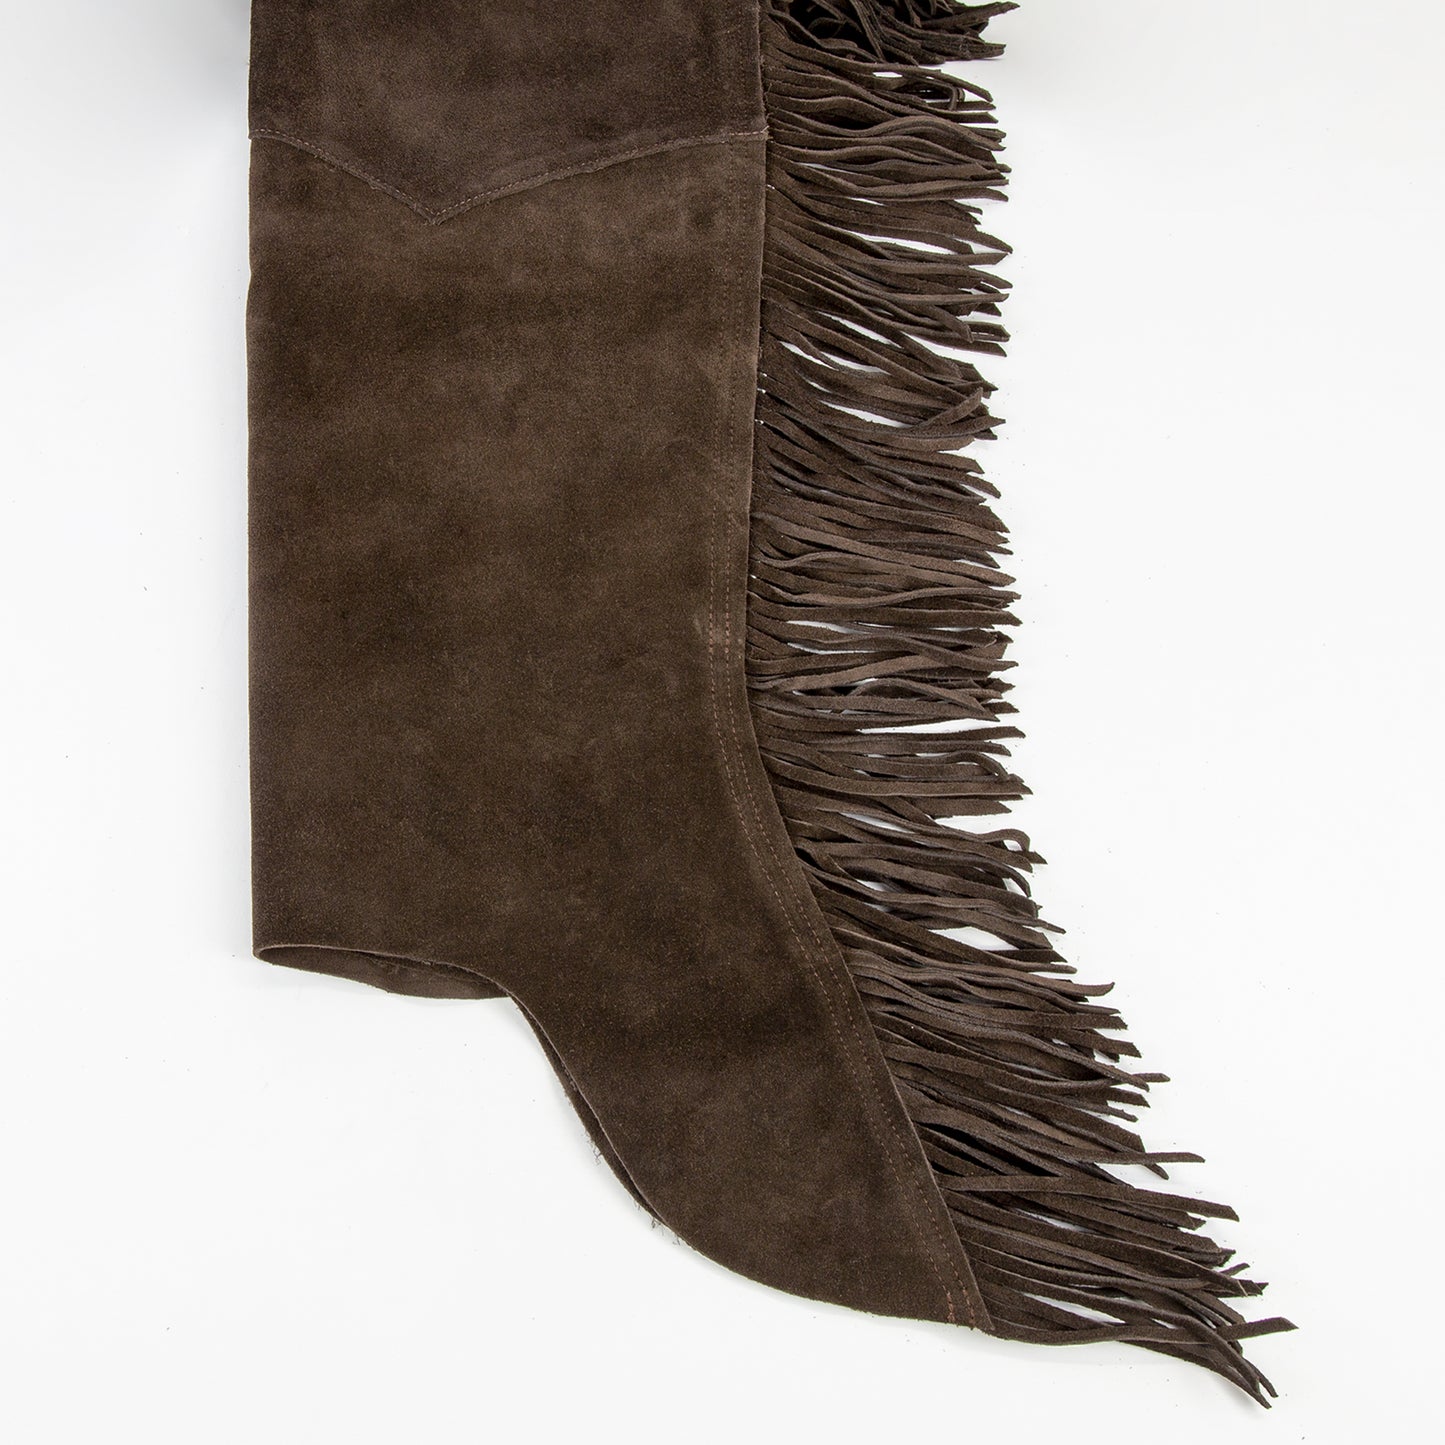 Western Equitation Chaps - Brown Suede - Fringe - Single Concho